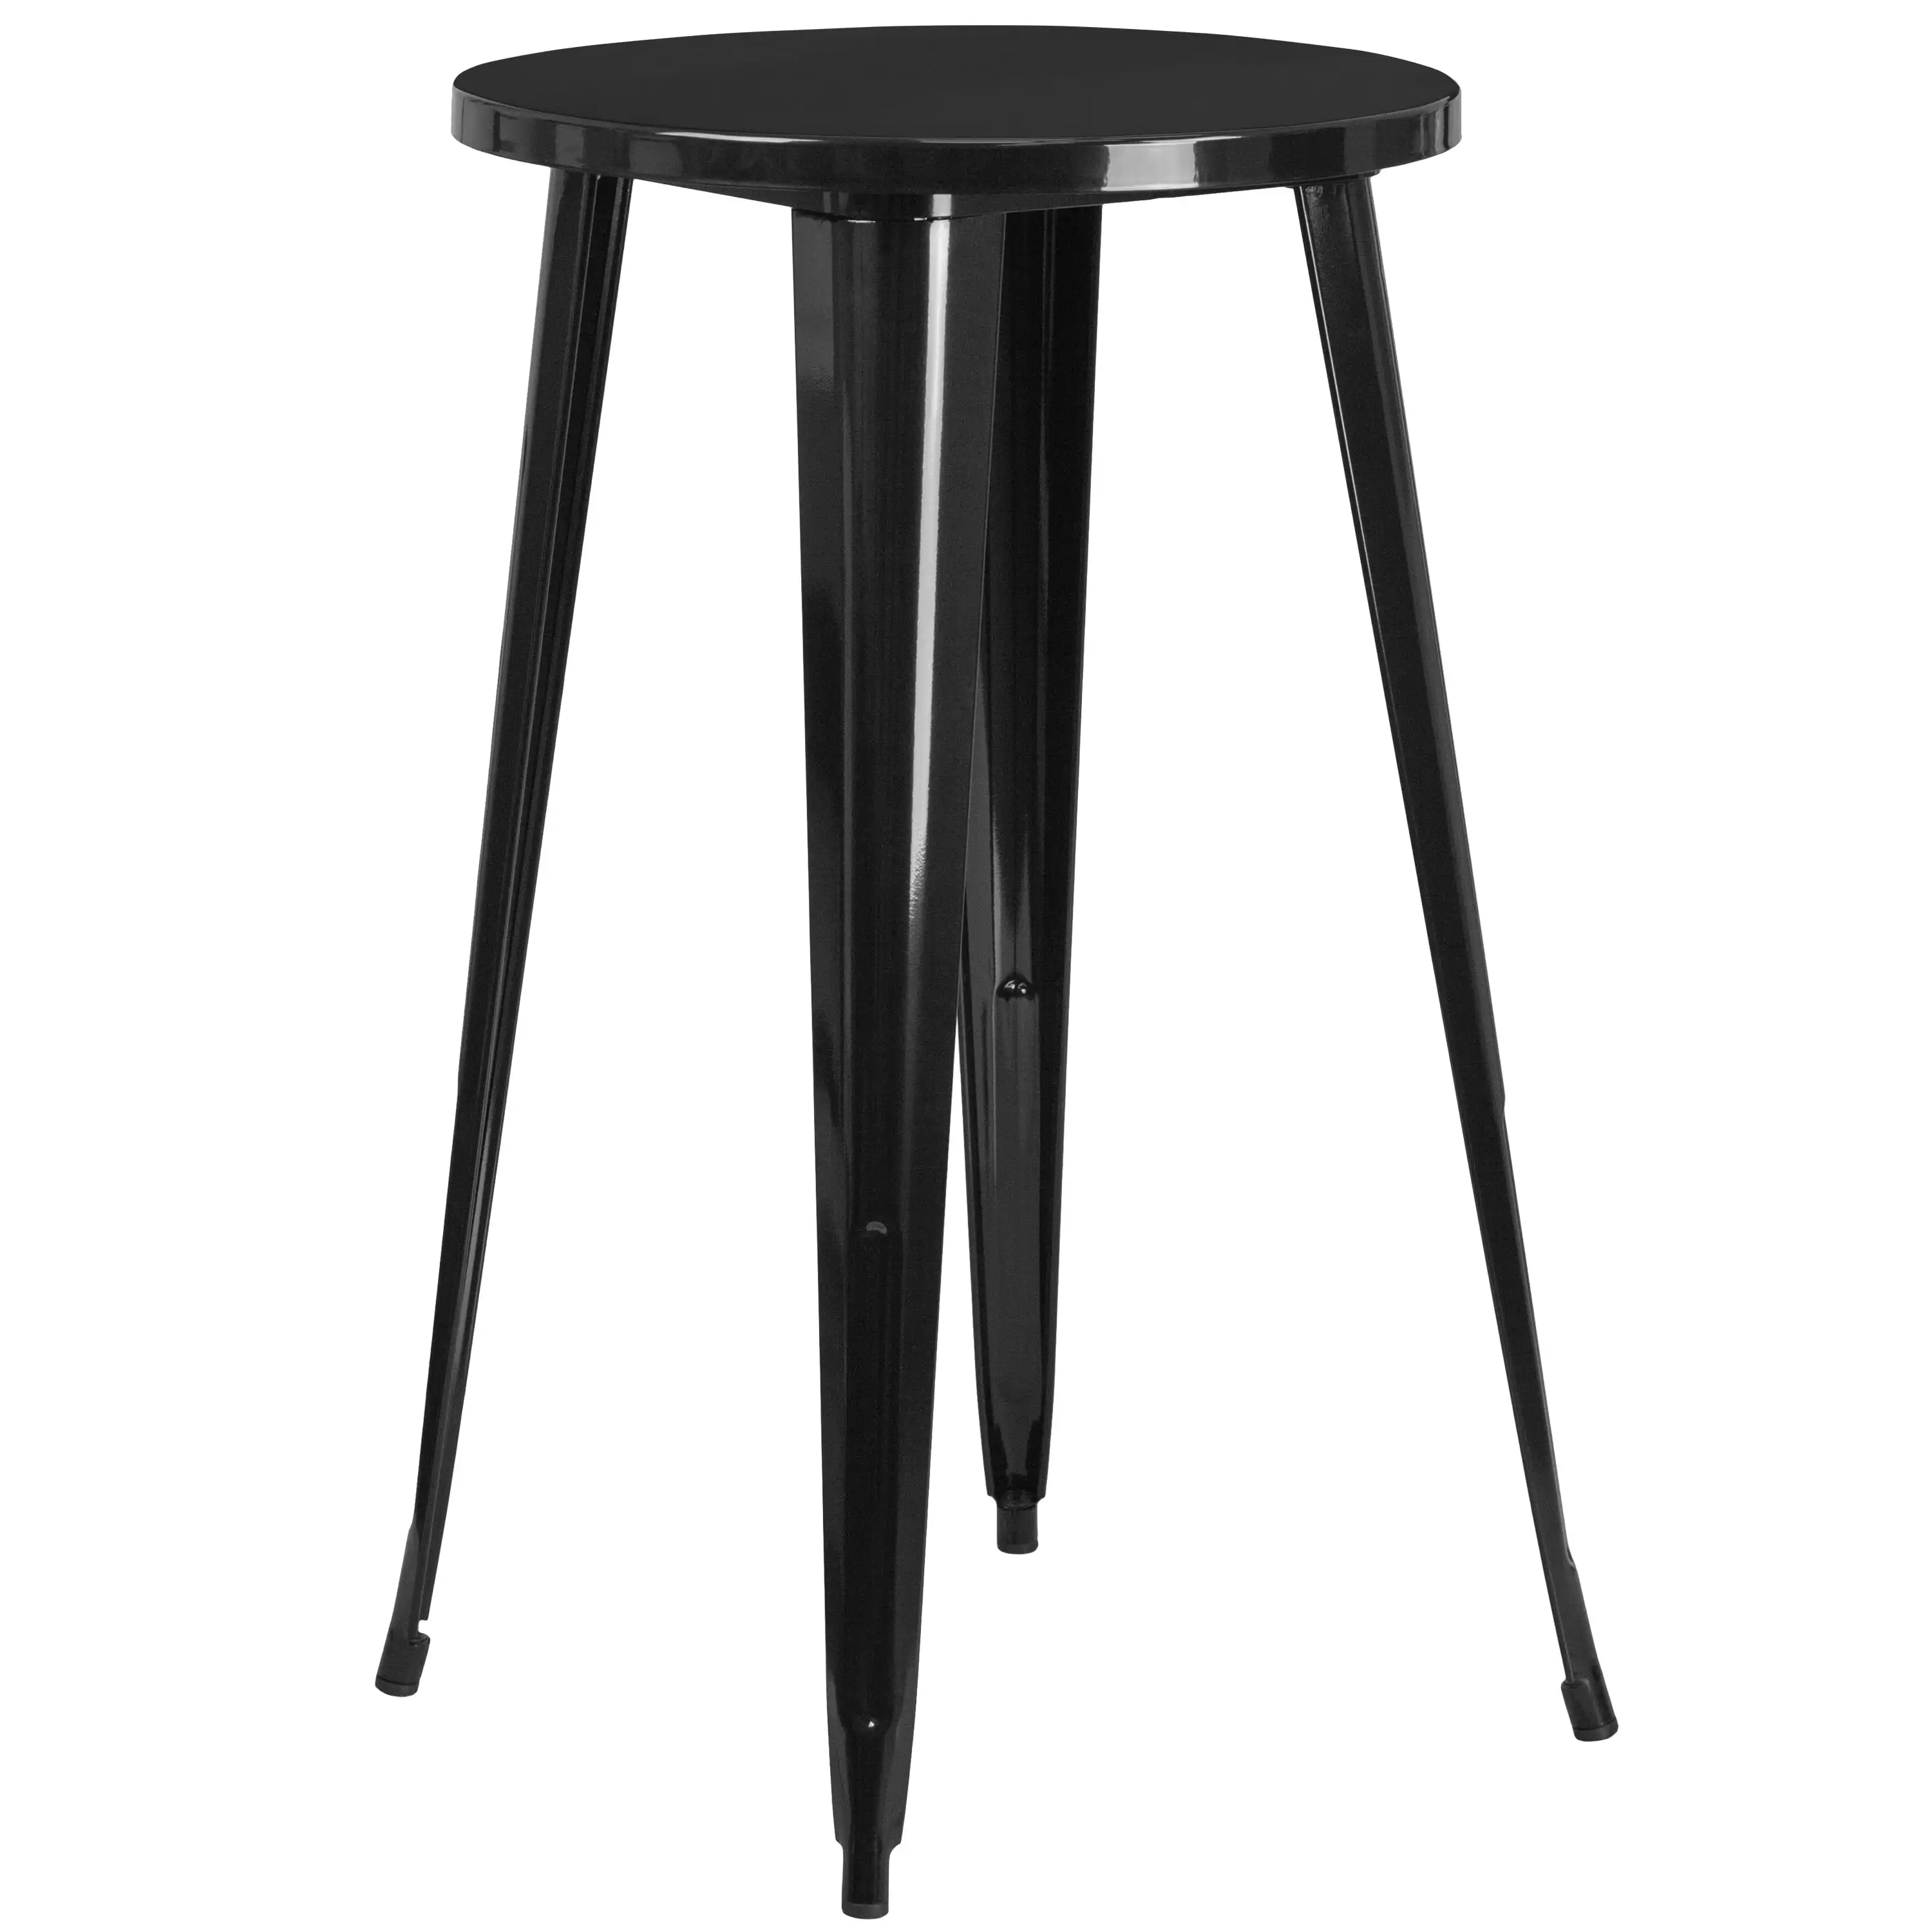 

24" Round Black Metal Indoor-Outdoor Bar Height Table or Bistro Pub Kitchen Tall Dining Cocktail Table